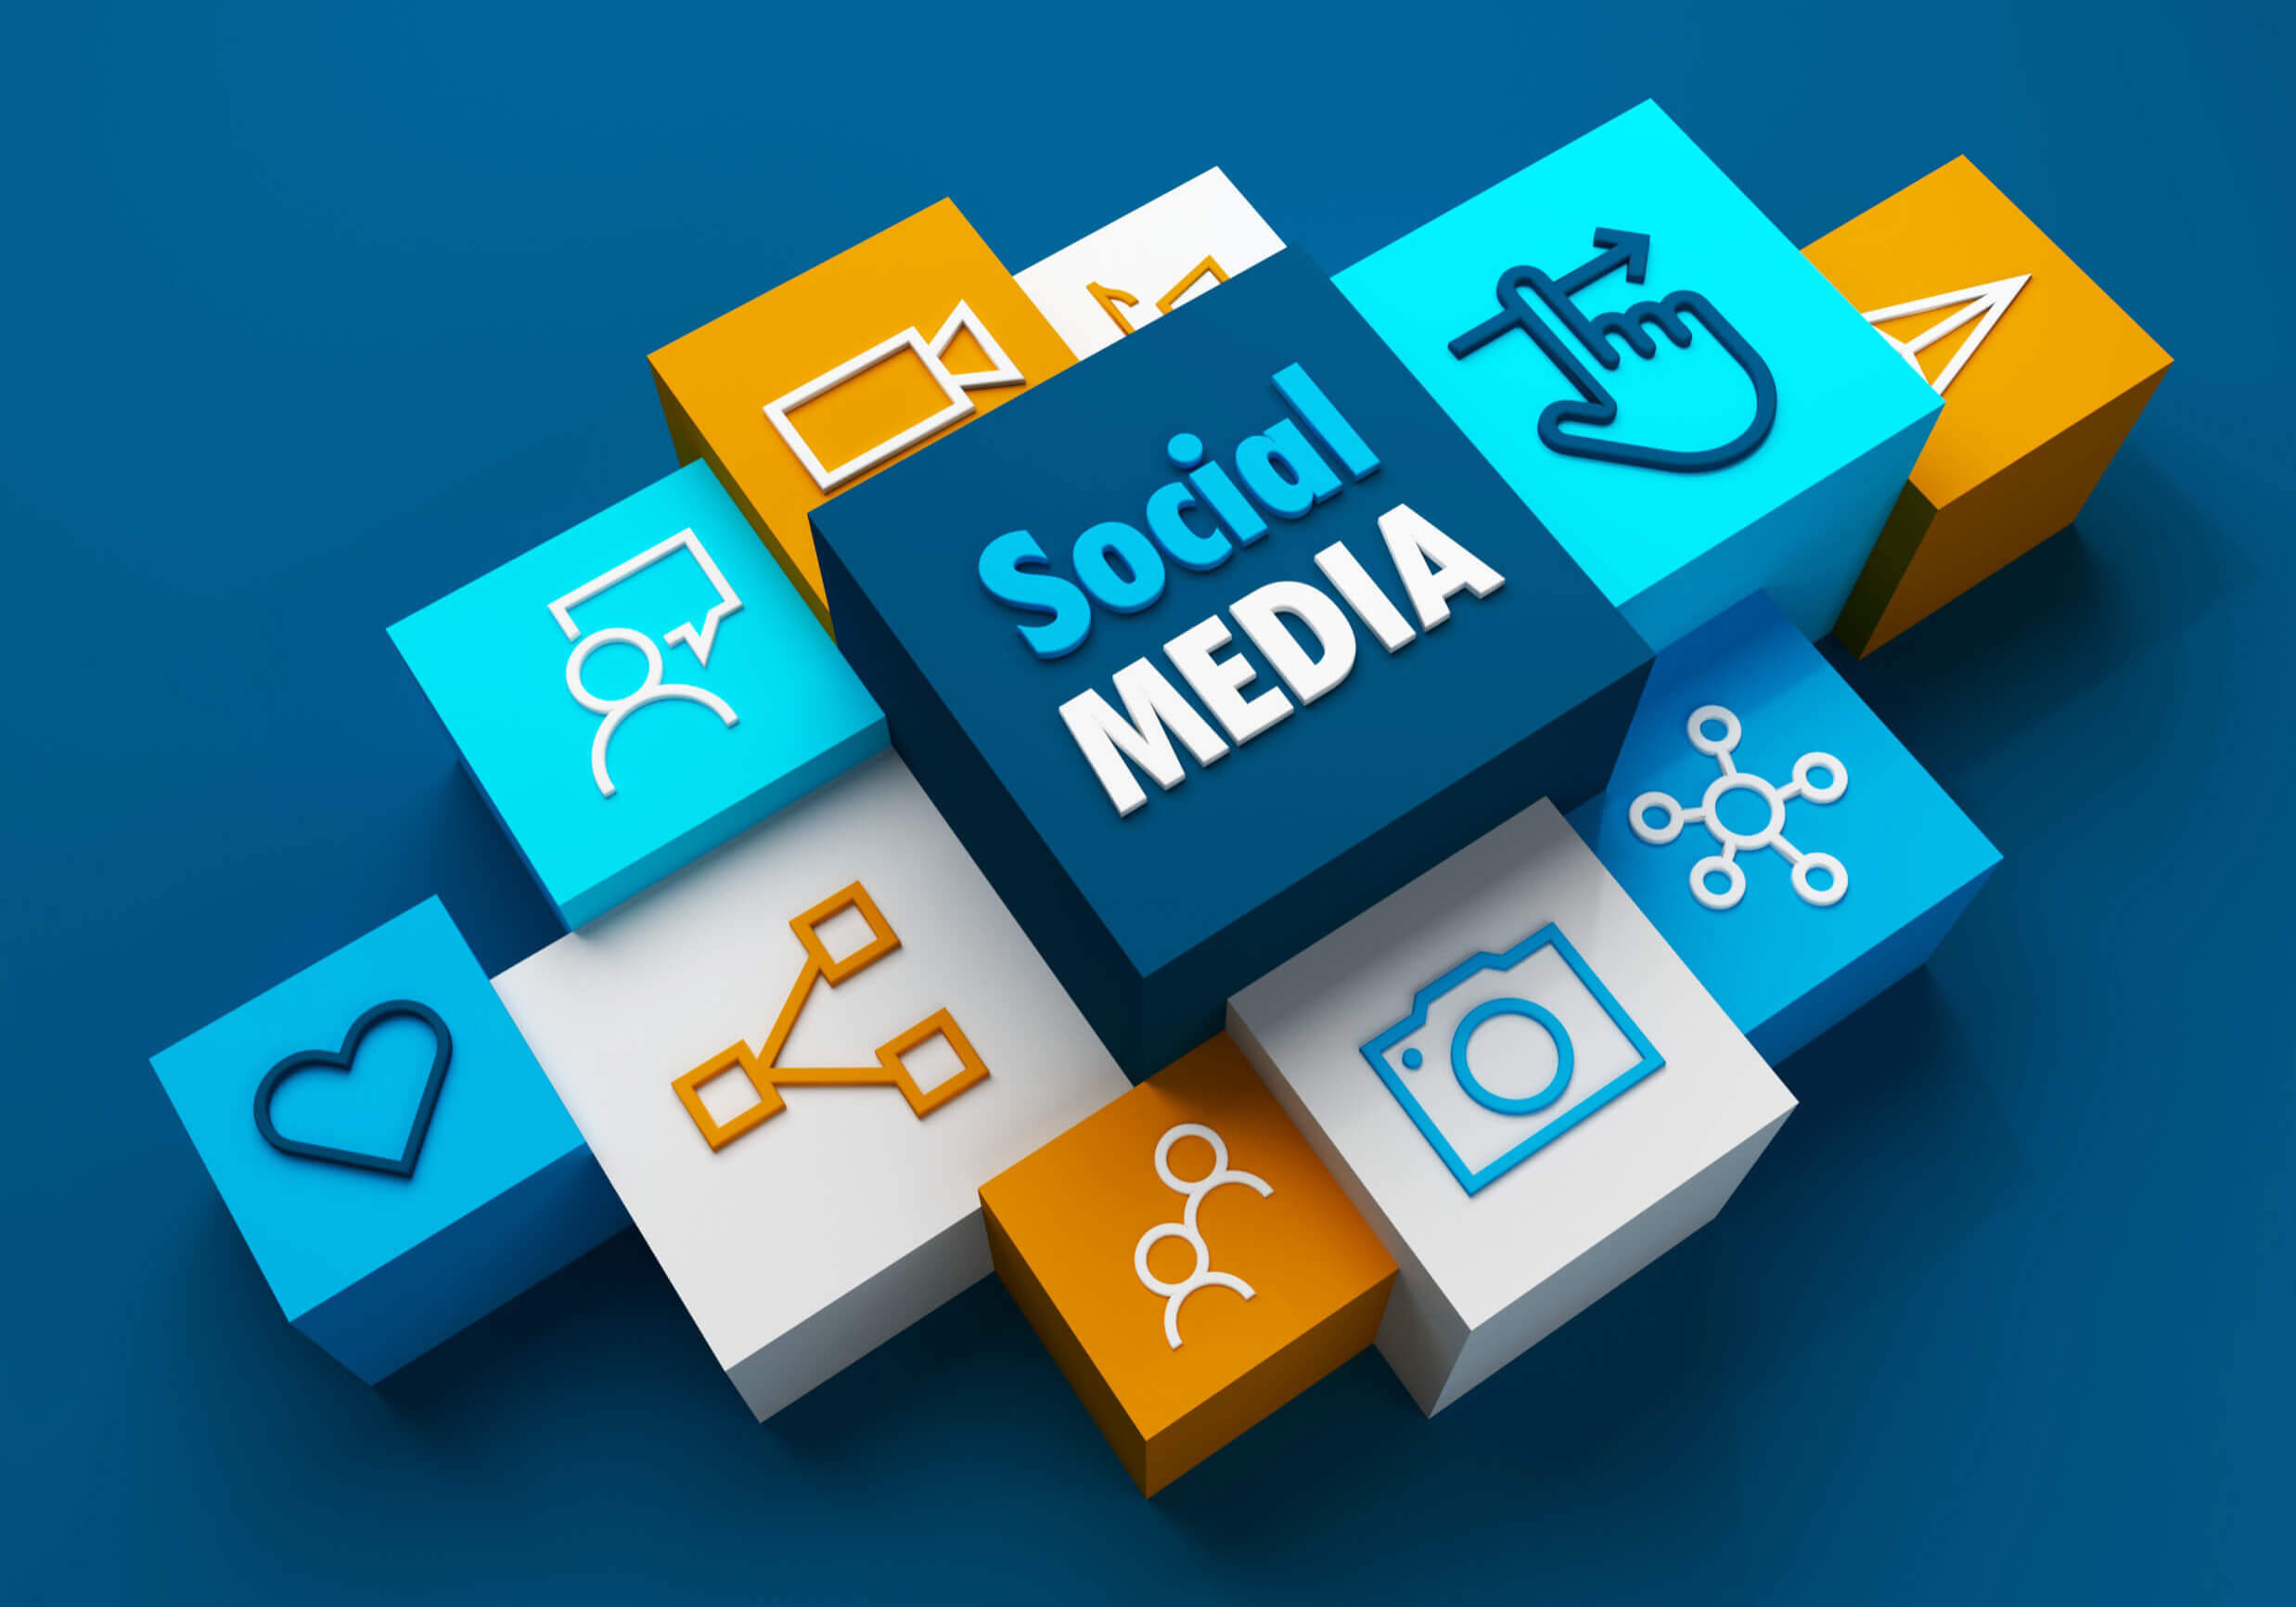 Perspective view of 3D render of SOCIAL MEDIA business concept with symbols on colorful cubes